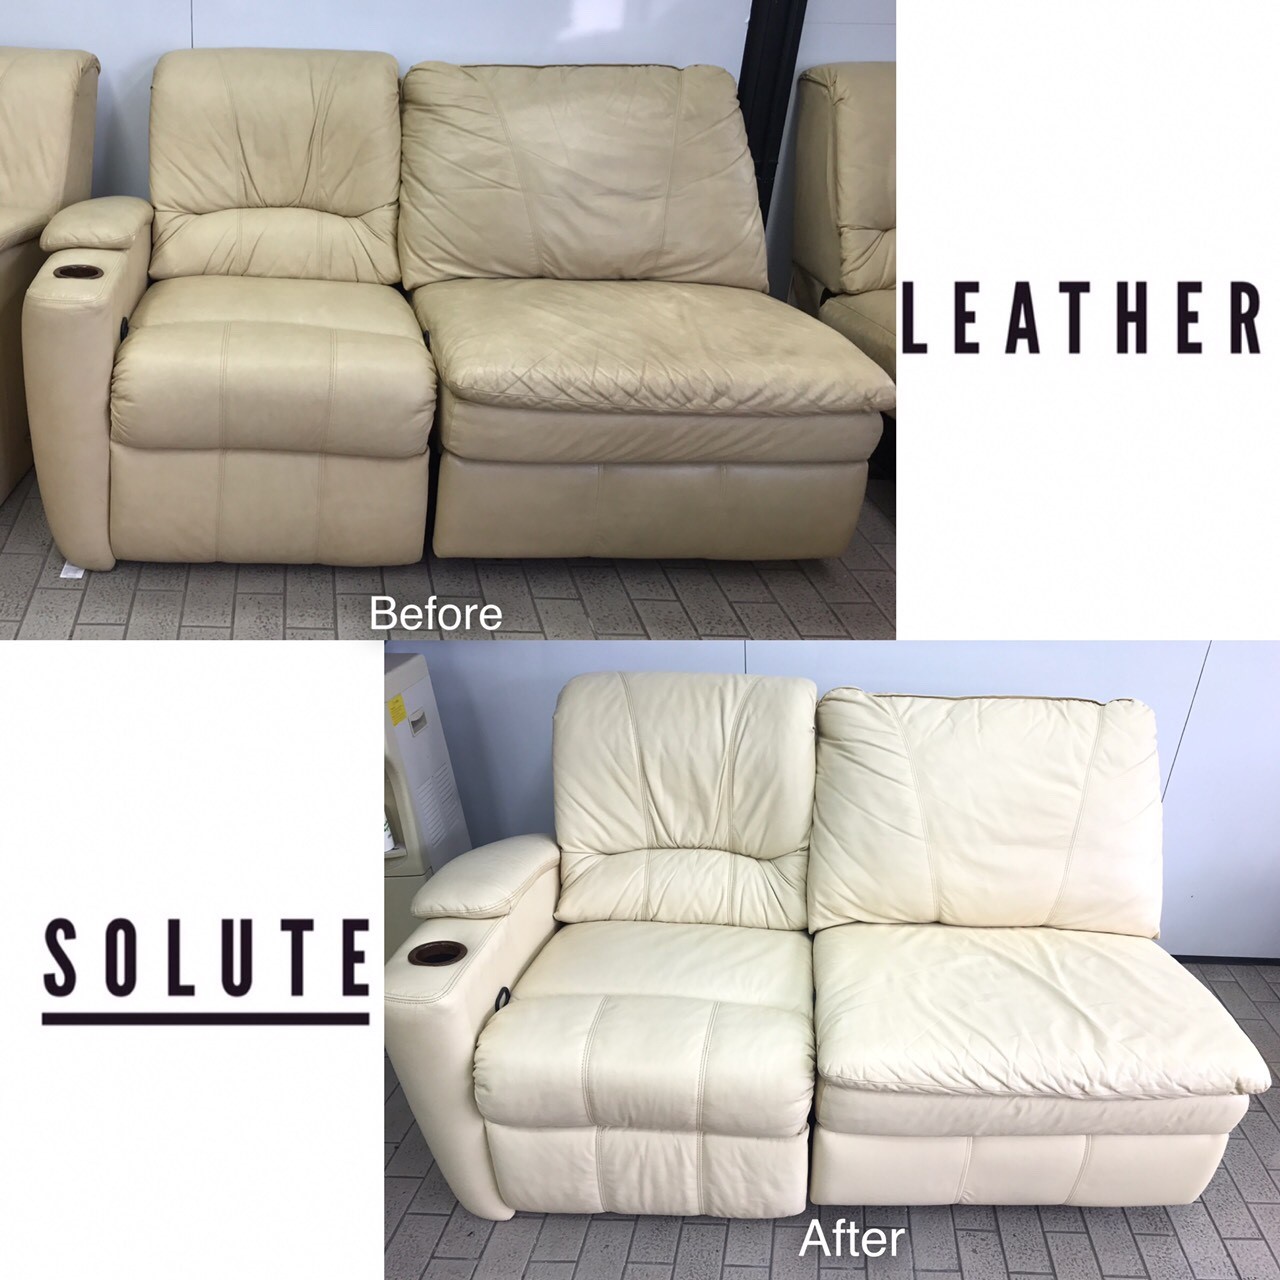 //leathersolute.co.th/wp-content/uploads/2018/12/Cleaning-furniture_๑๘๑๒๓๐_0006.jpg